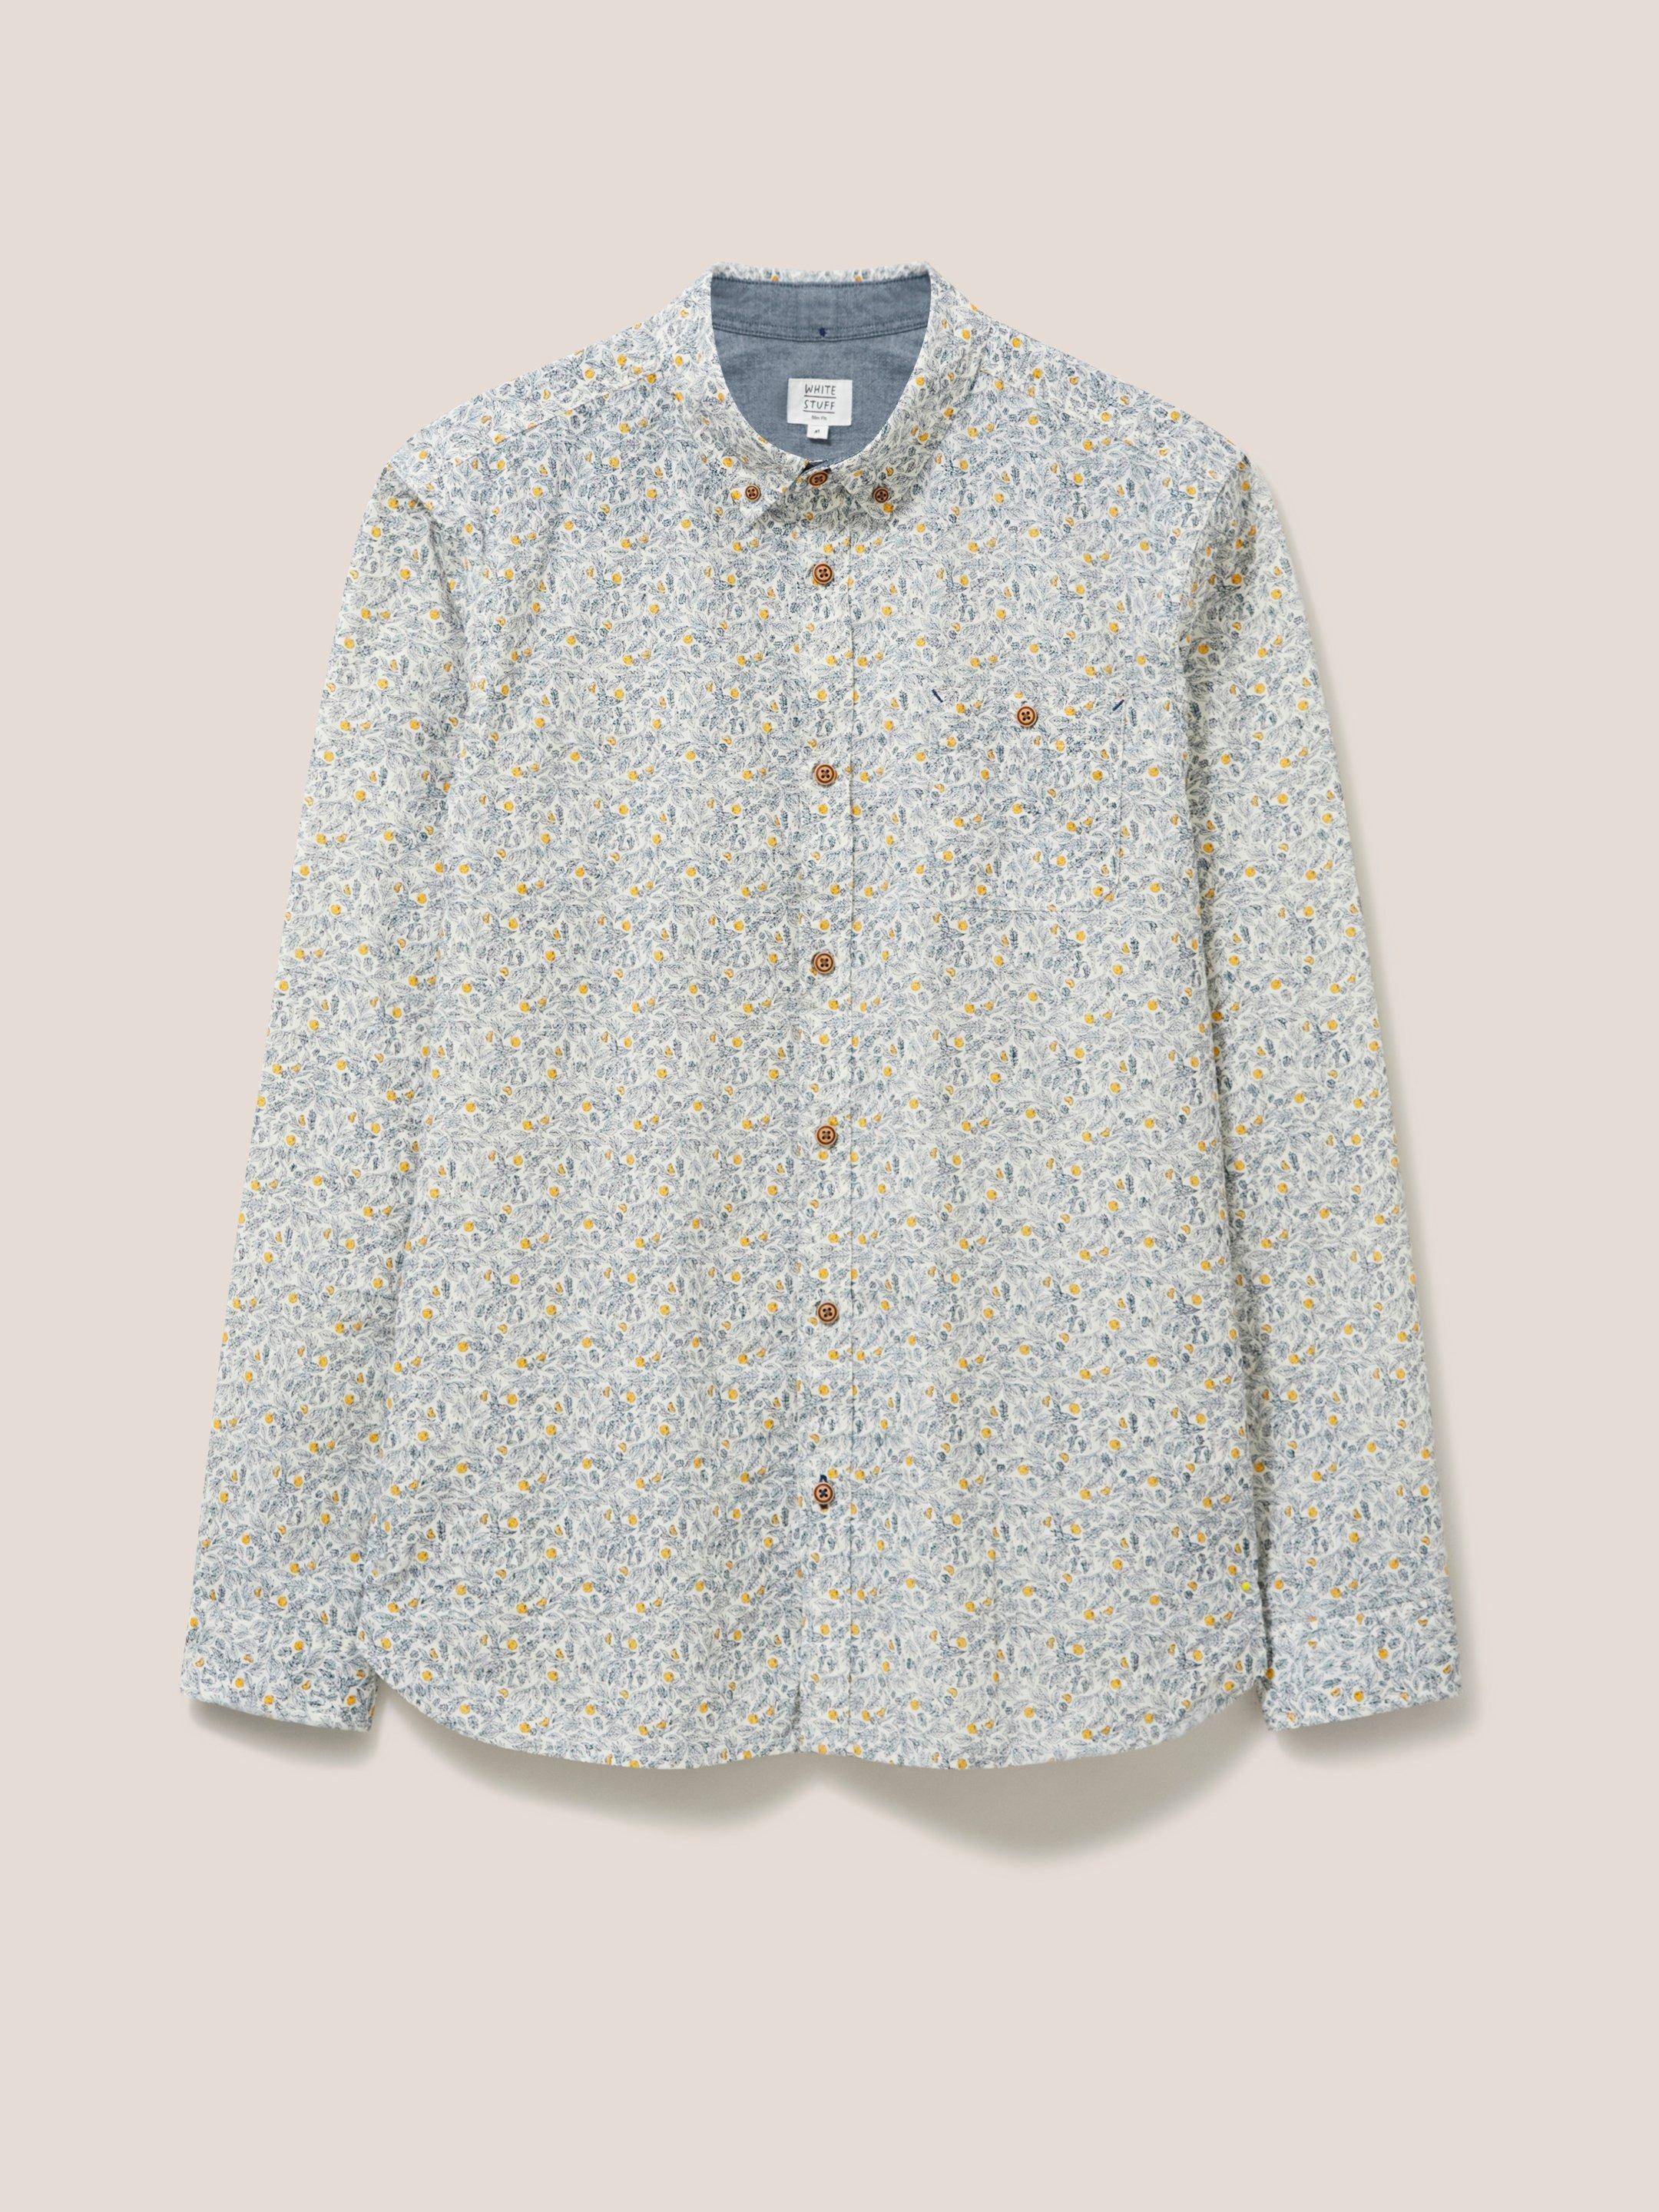 Clementine Print Shirt in IVORY MLT - FLAT FRONT